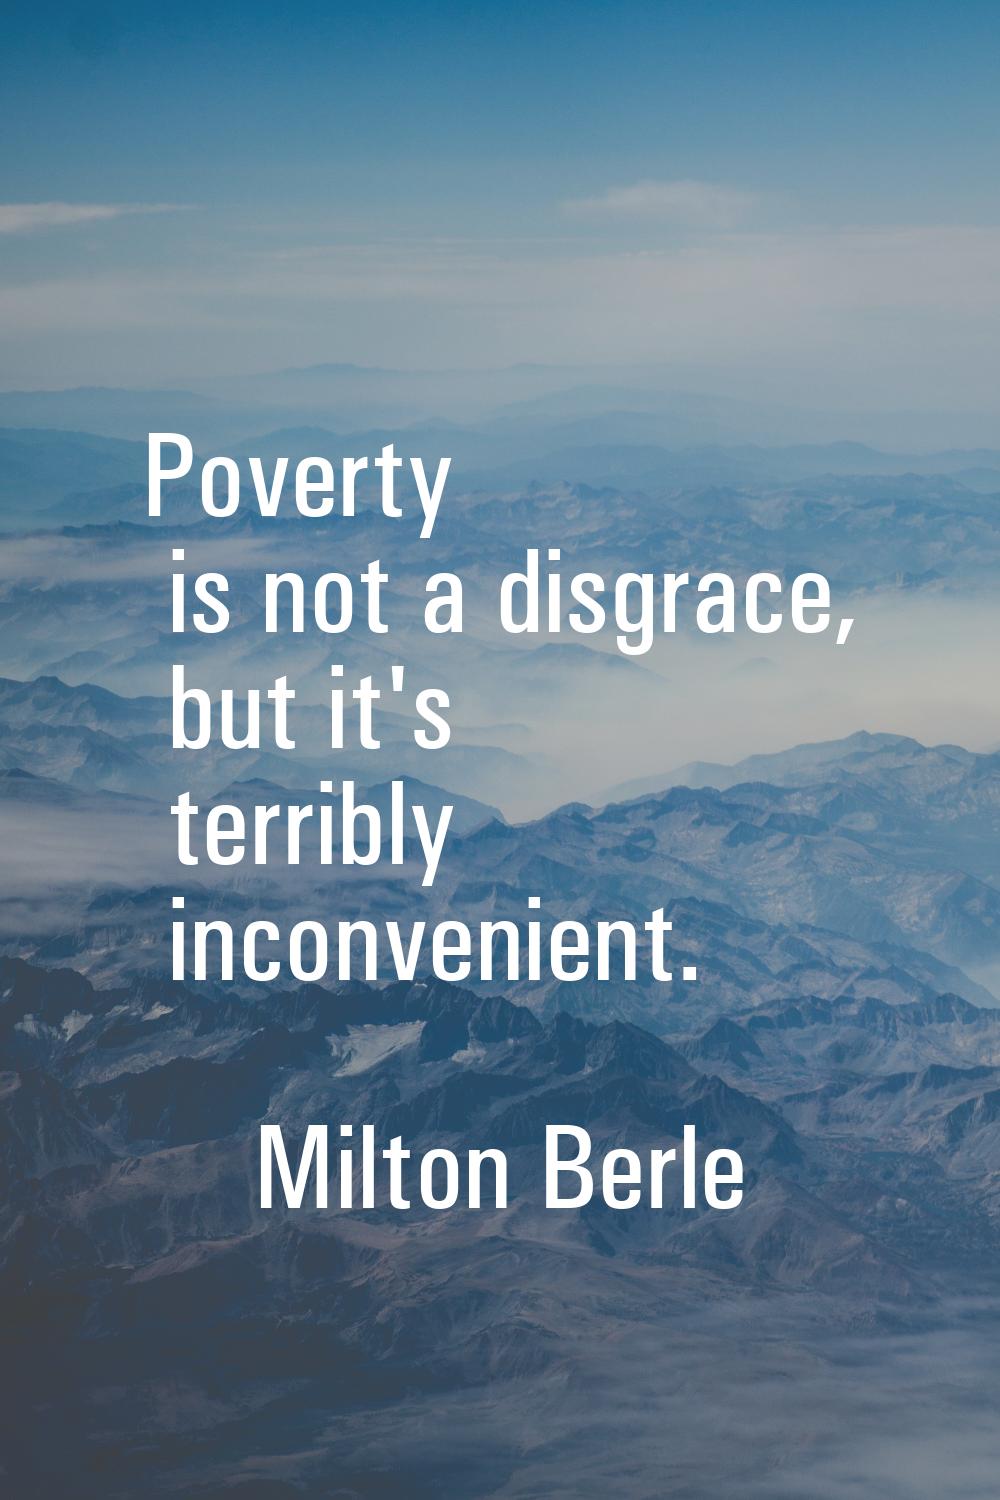 Poverty is not a disgrace, but it's terribly inconvenient.